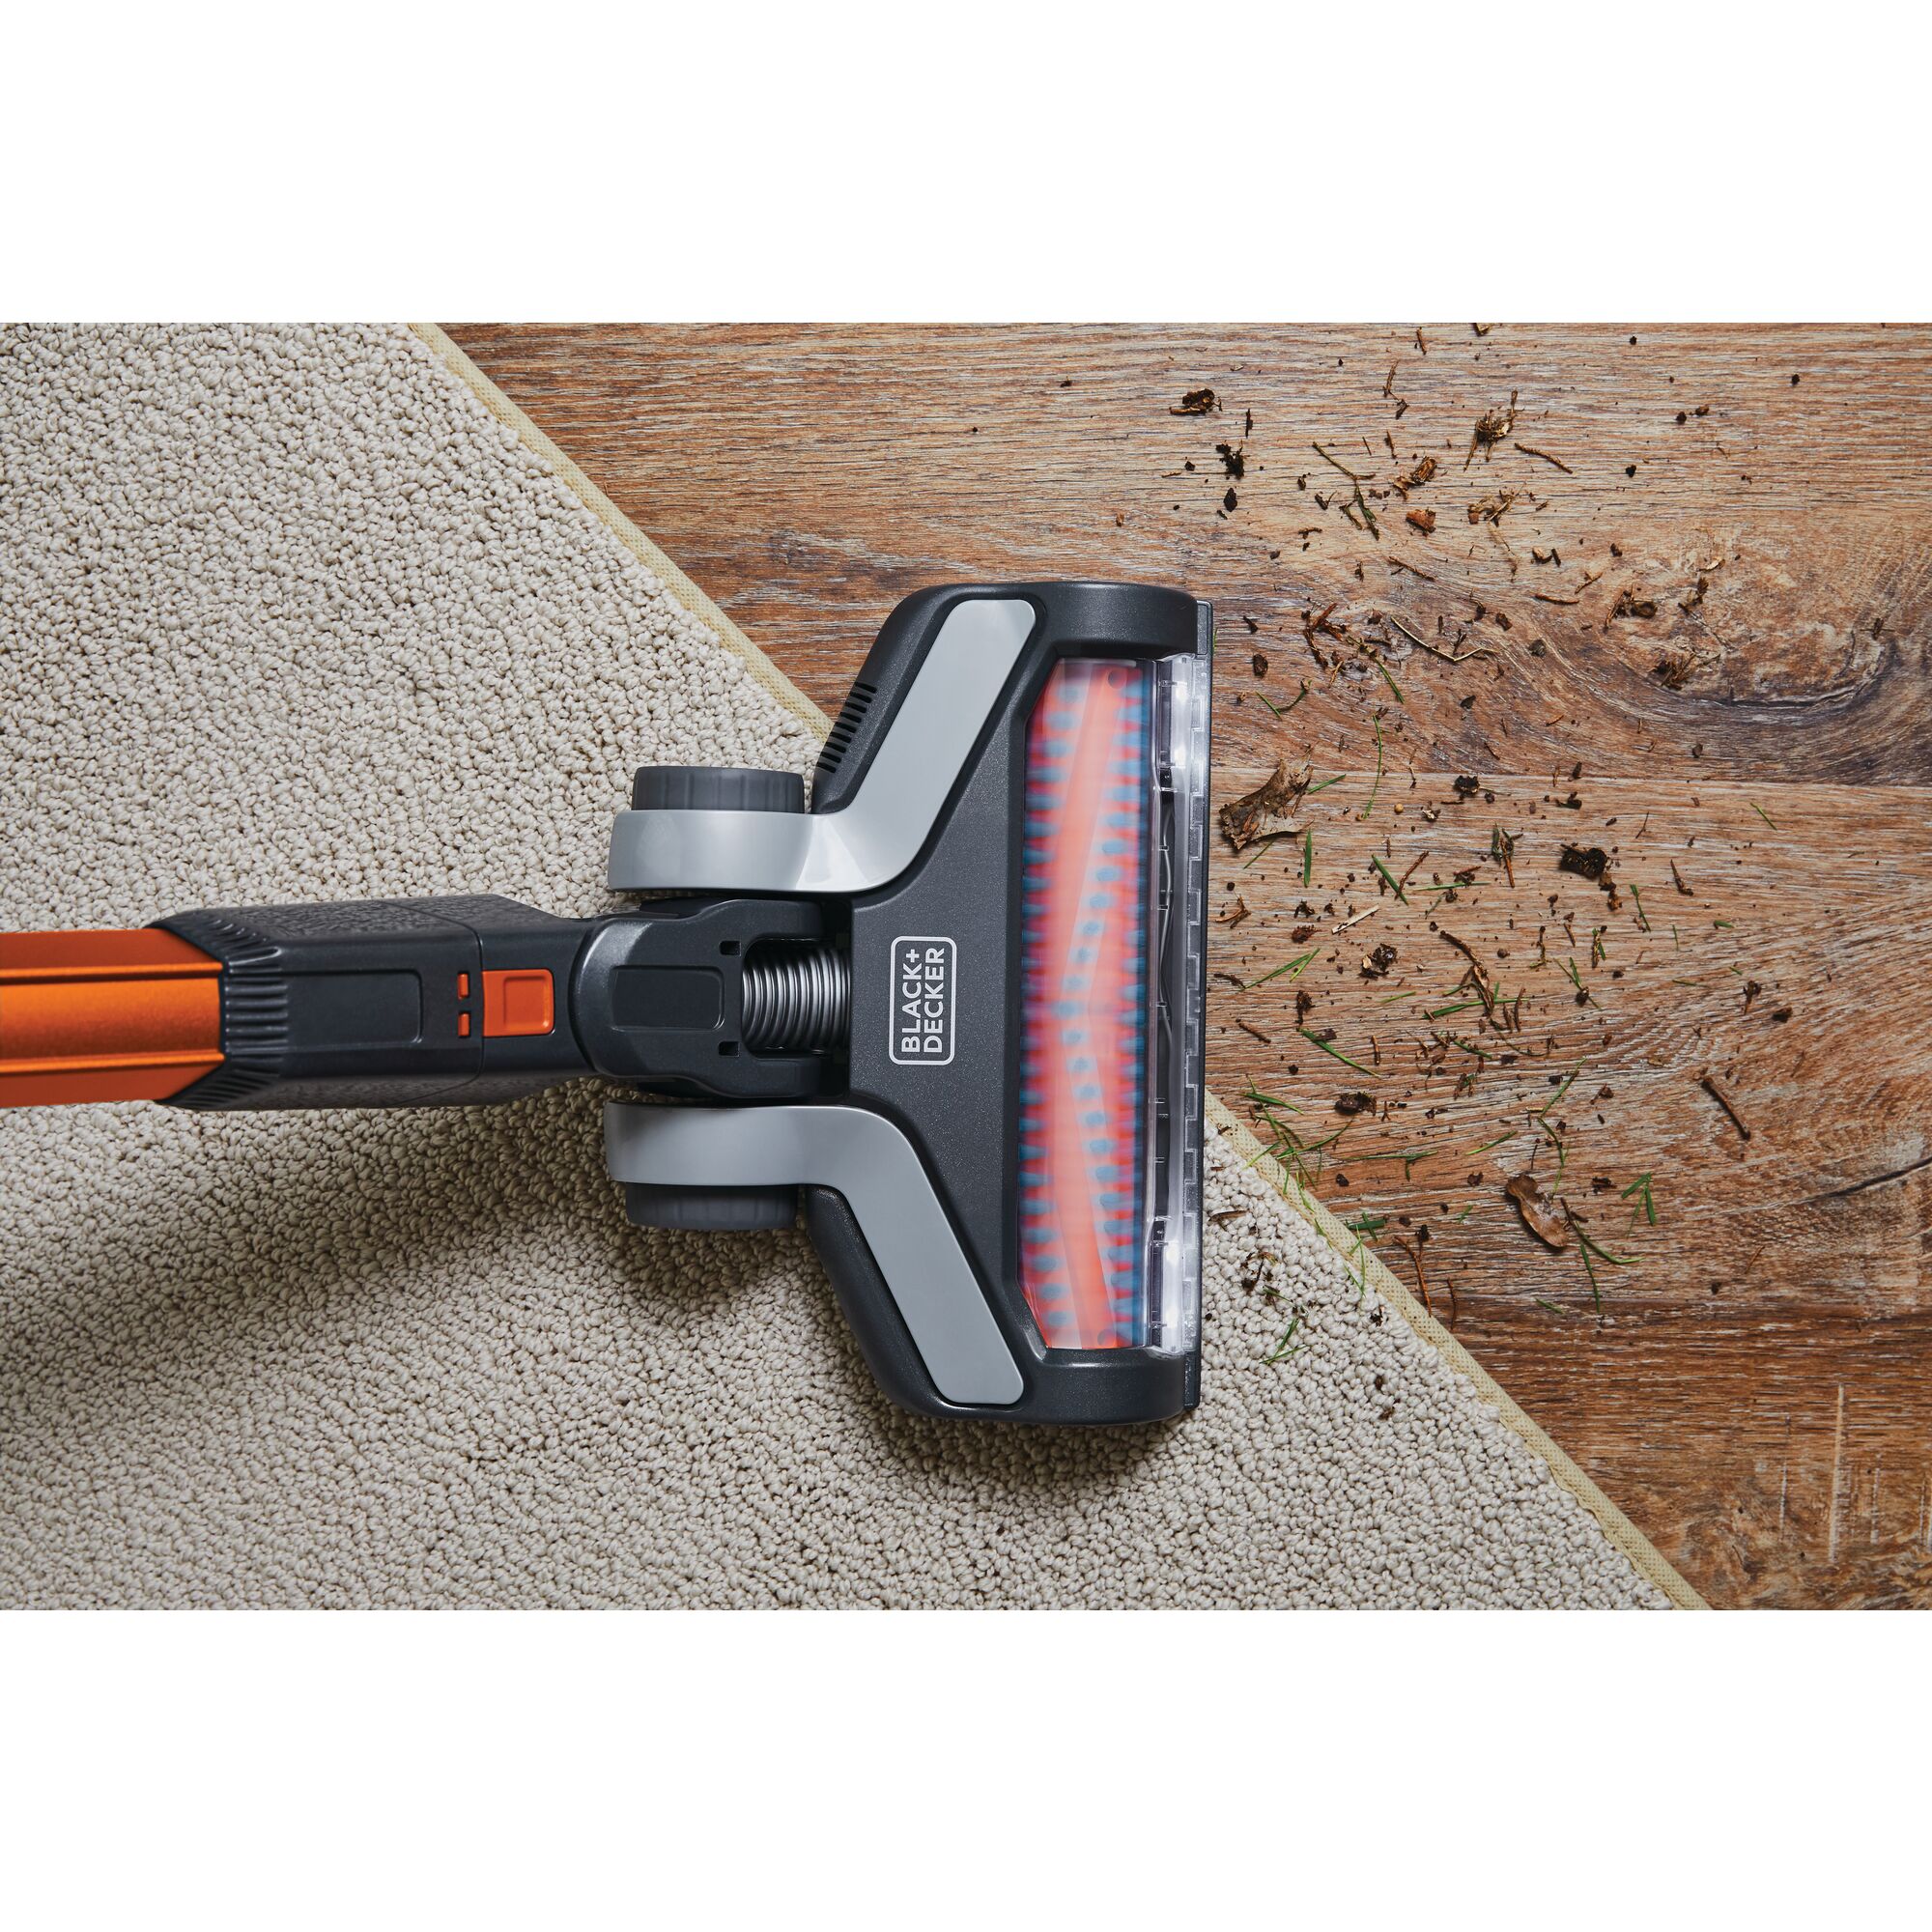 POWER SERIES Extreme Cordless Stick Vacuum Cleaner being used to clean debris from rug and wooden floor.